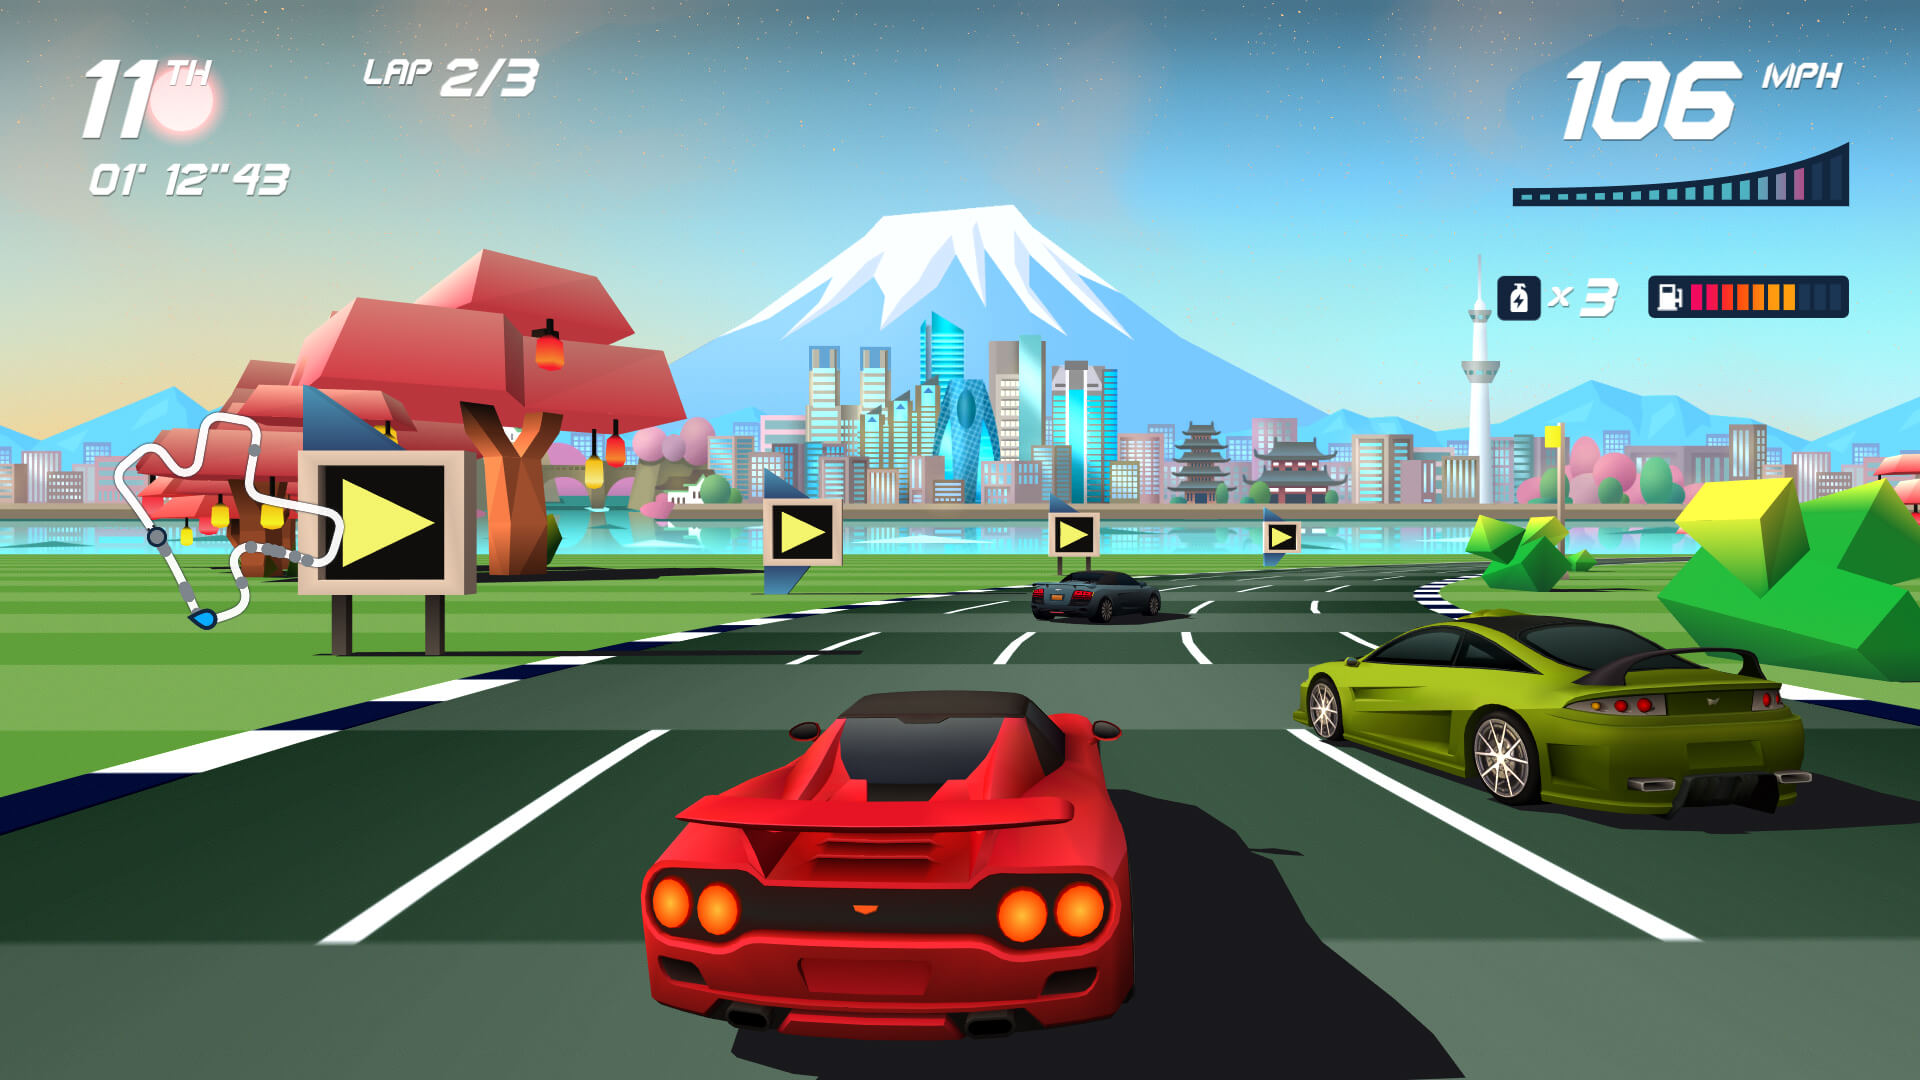 Horizon Chase Turbo, a game created by Aquiris (now Epic Games Brasil)